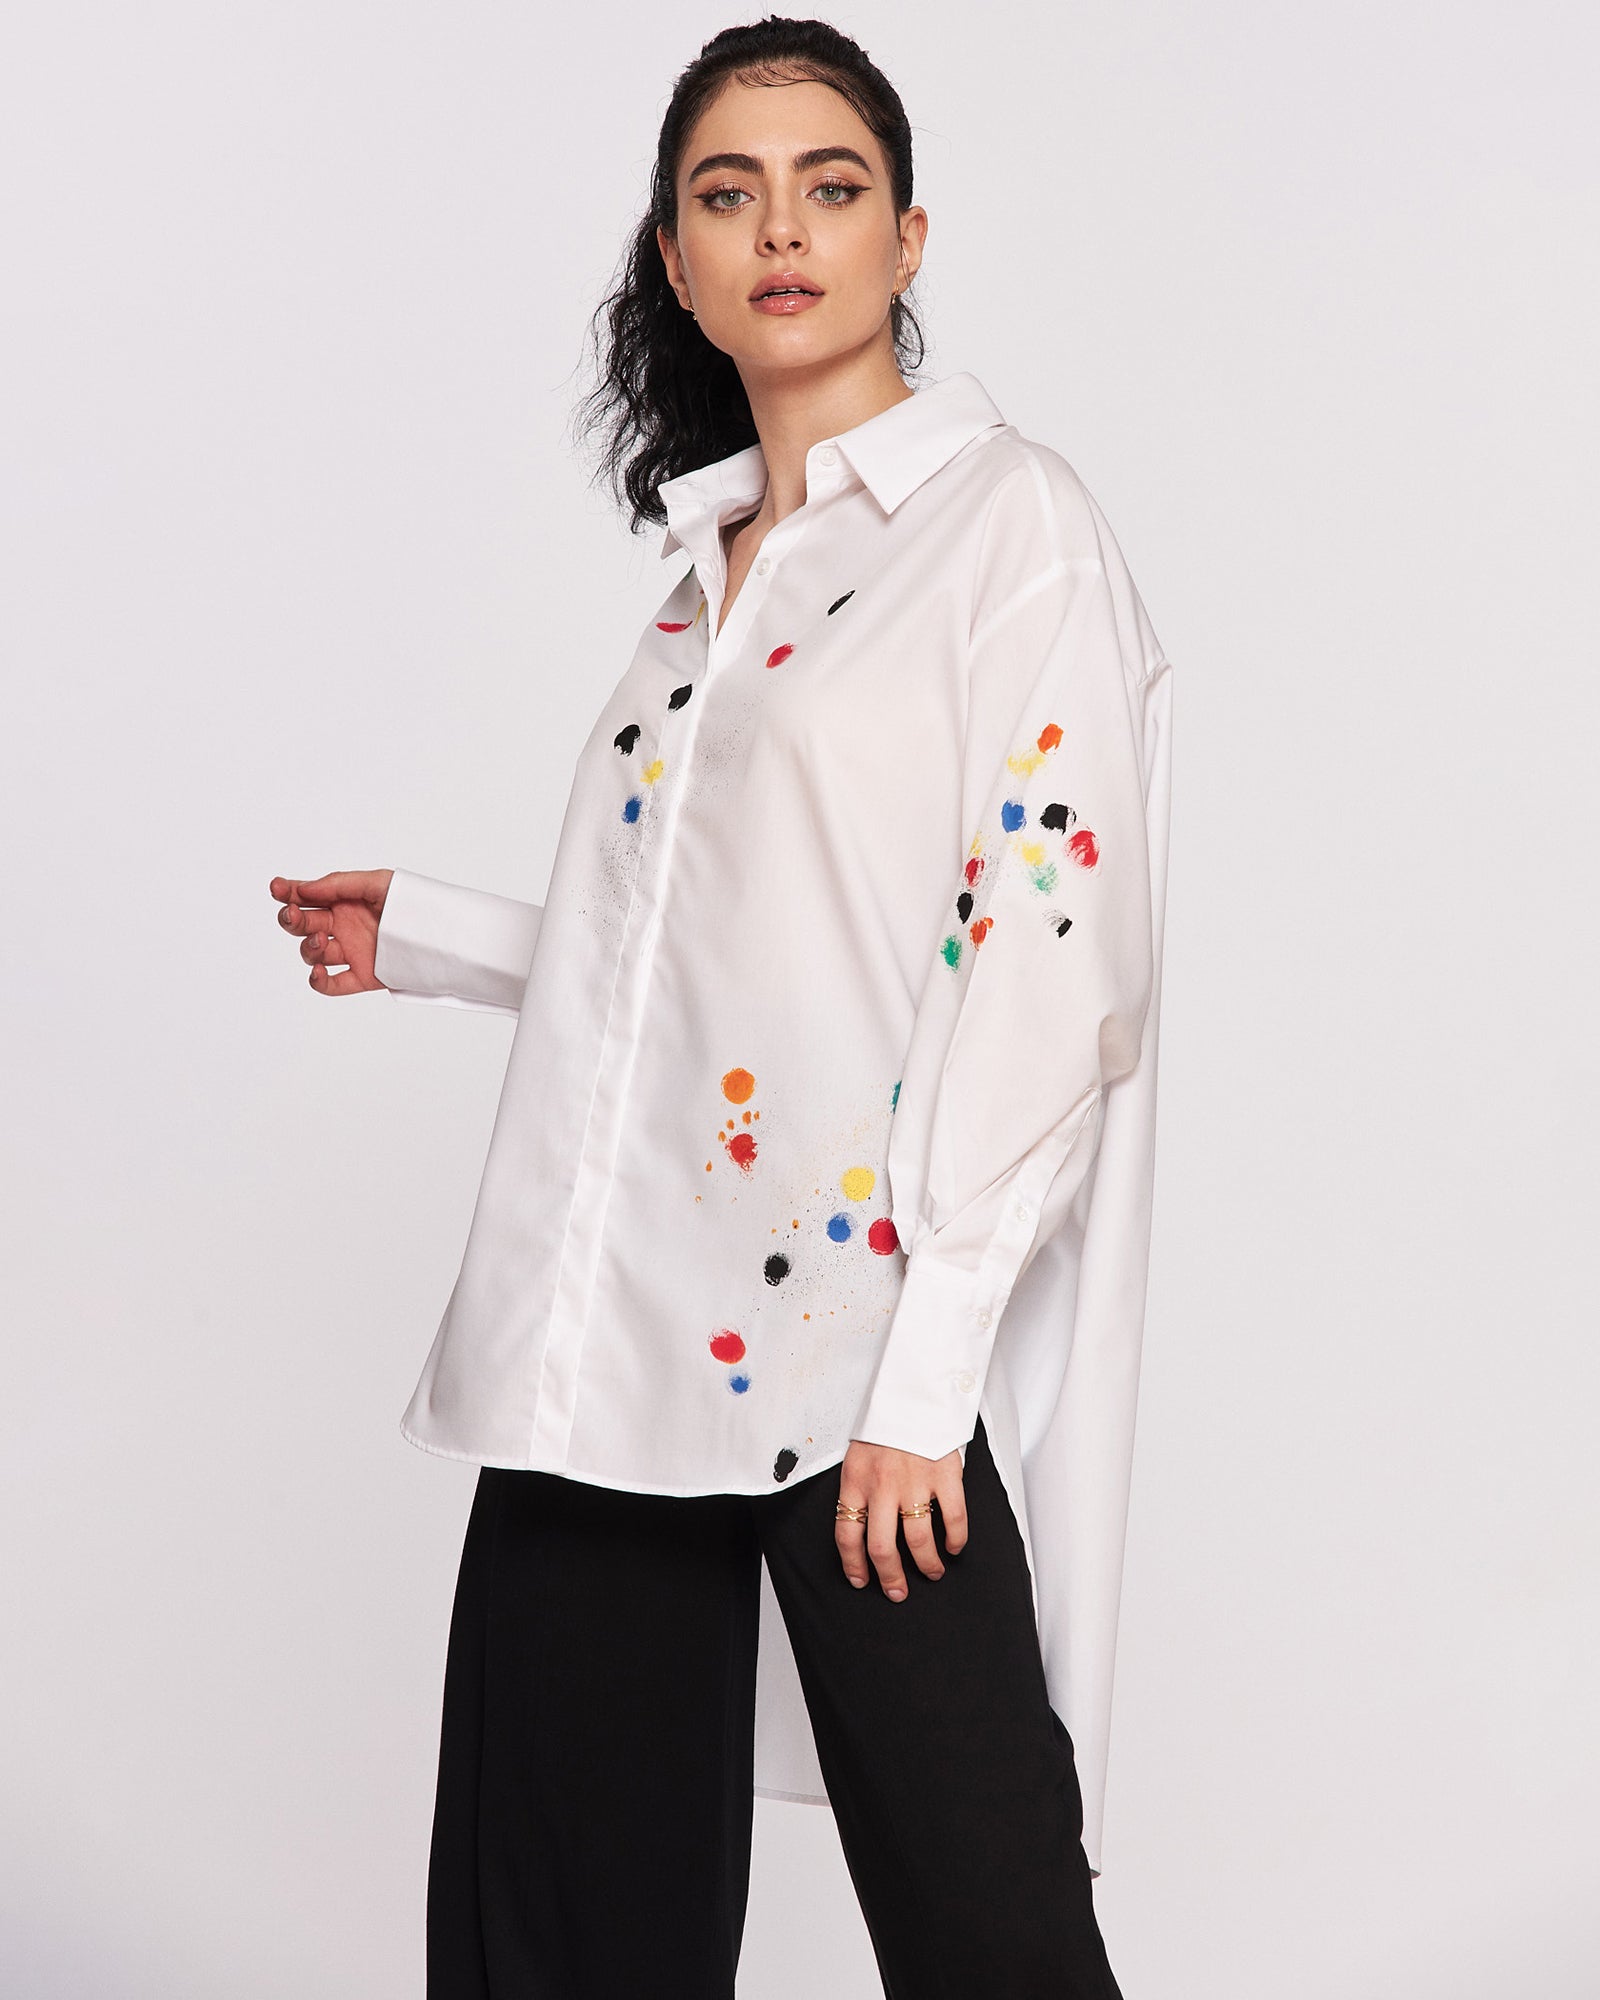 "Colorful Spots" Hand Painted Women's Shirt